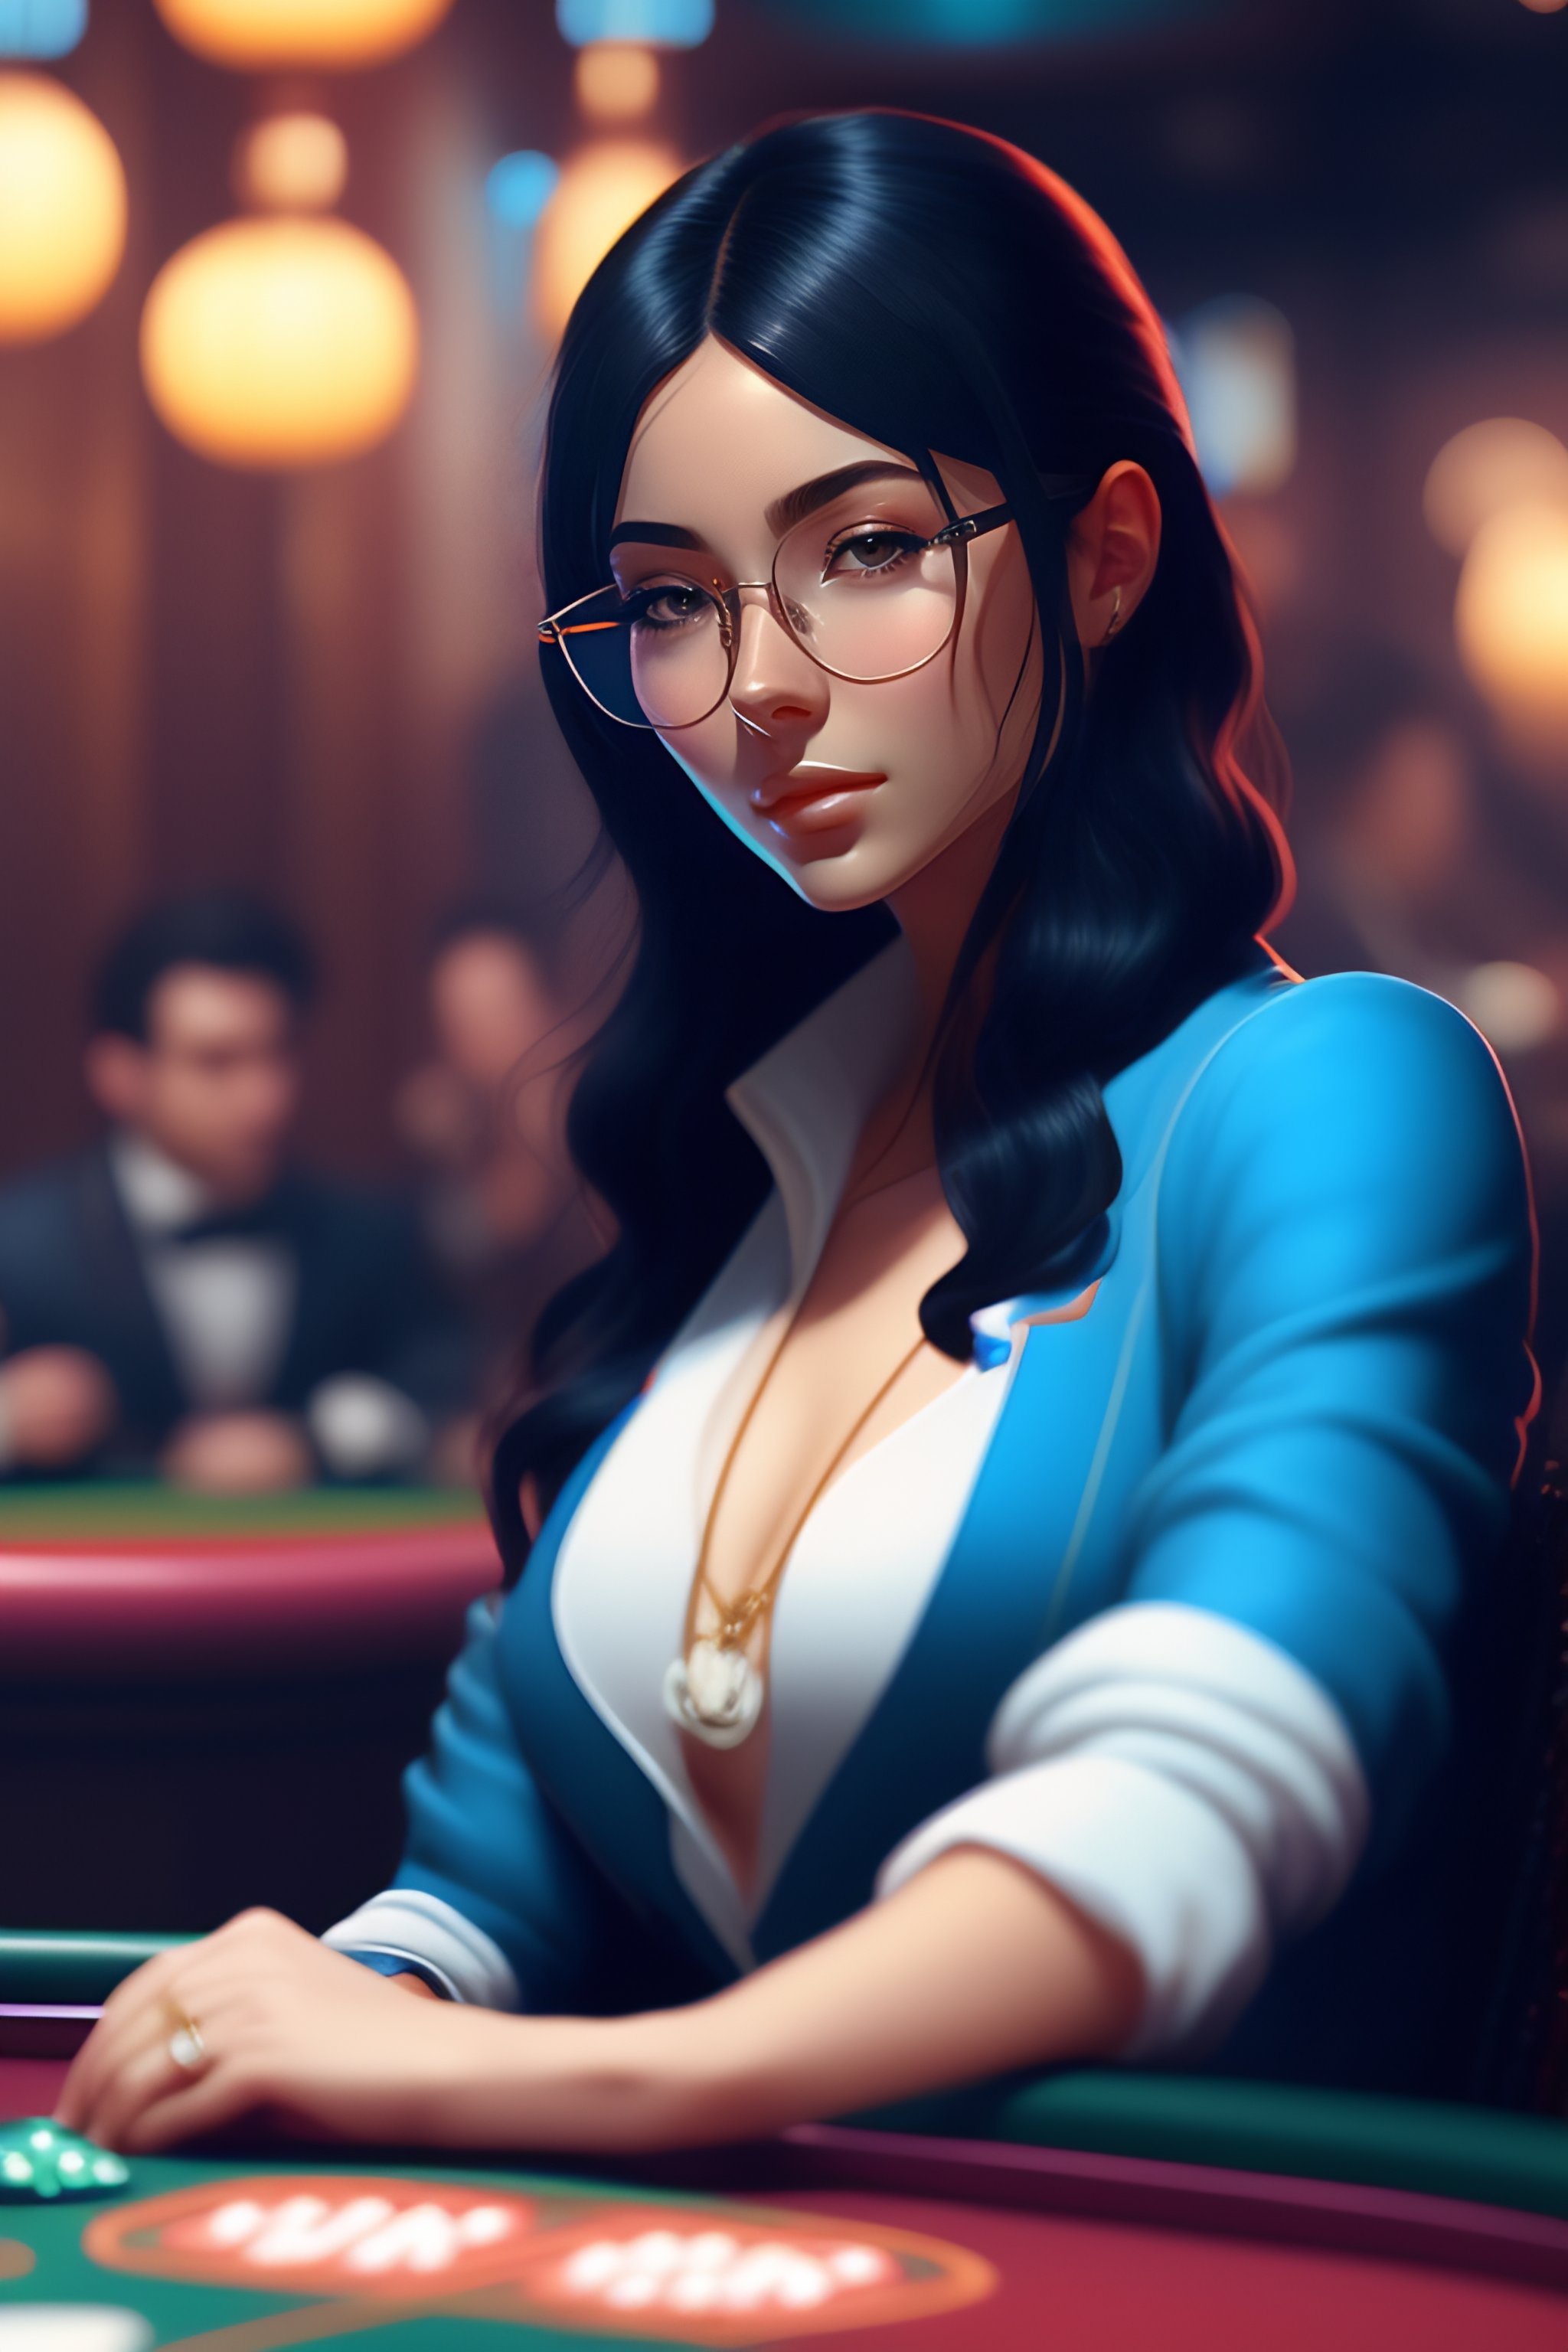 Lexica - Cute girl in blue sweater black hair black wayfarer glasses  sitting a poker table inside a casino drinking gin tonic c with background  by